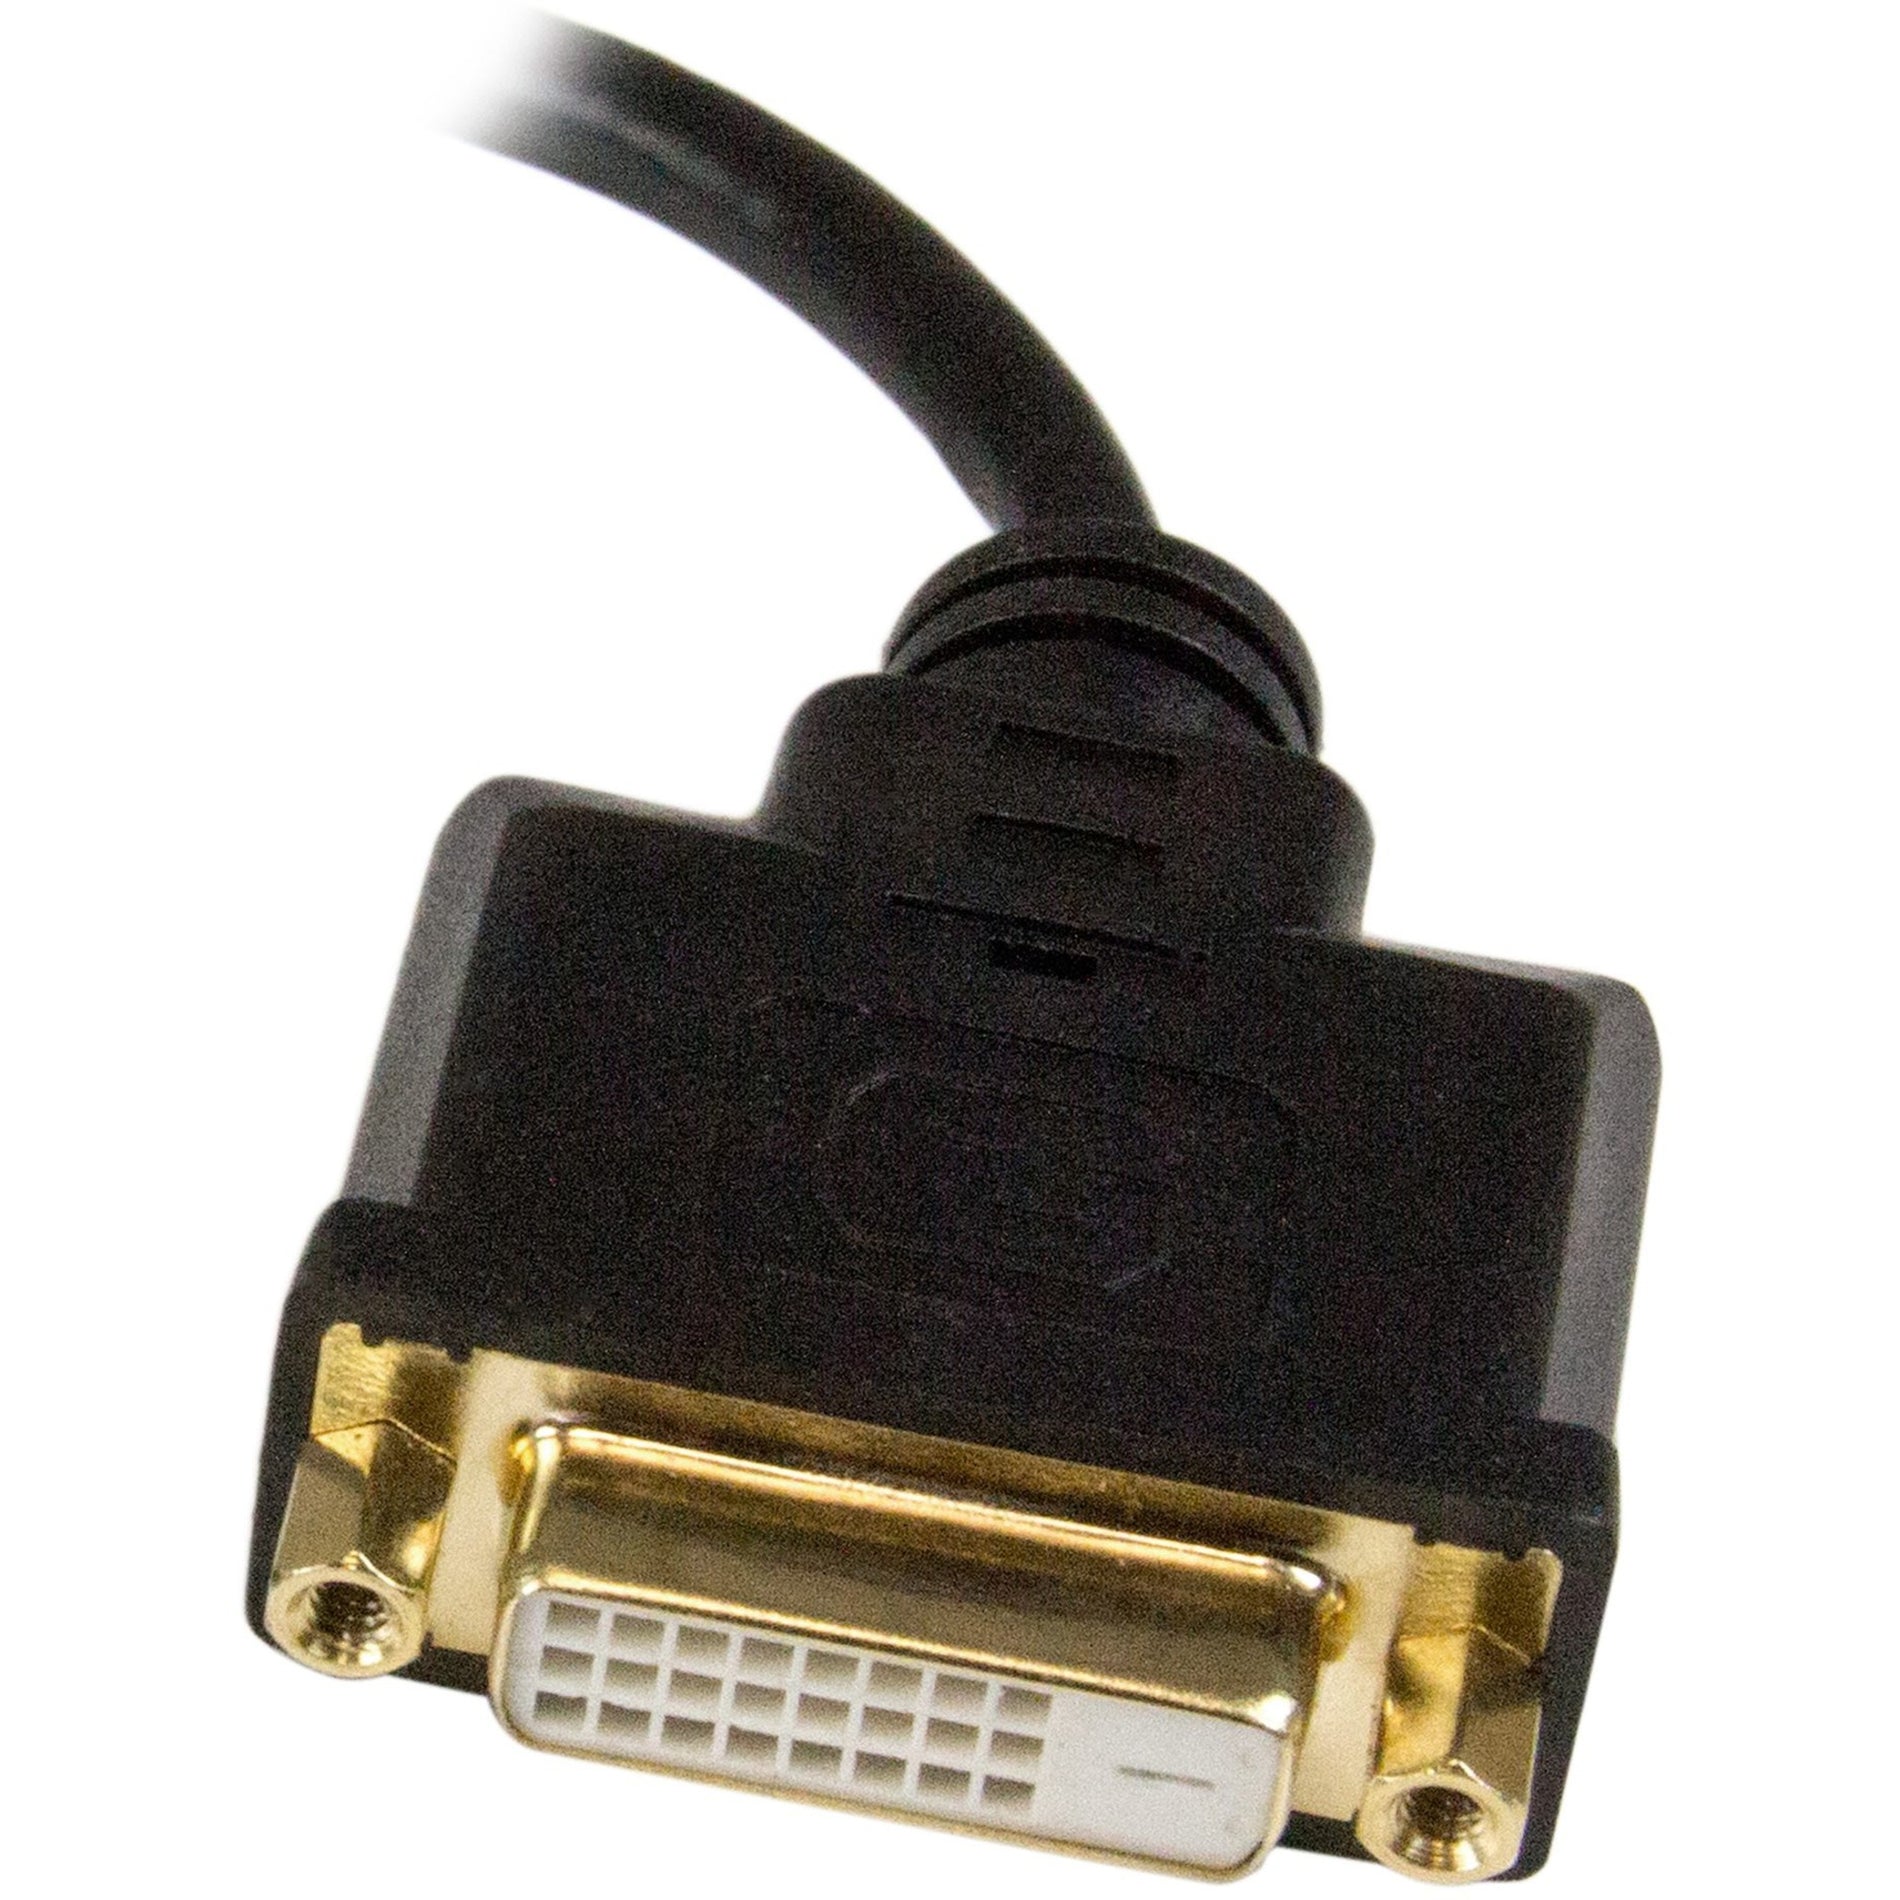 StarTech.com HDDDVIMF8IN Micro HDMI to DVI-D Adapter M/F - 8in, Video Cable Adapter, Gold-Plated Connectors, 1920 x 1200 Resolution [Discontinued]